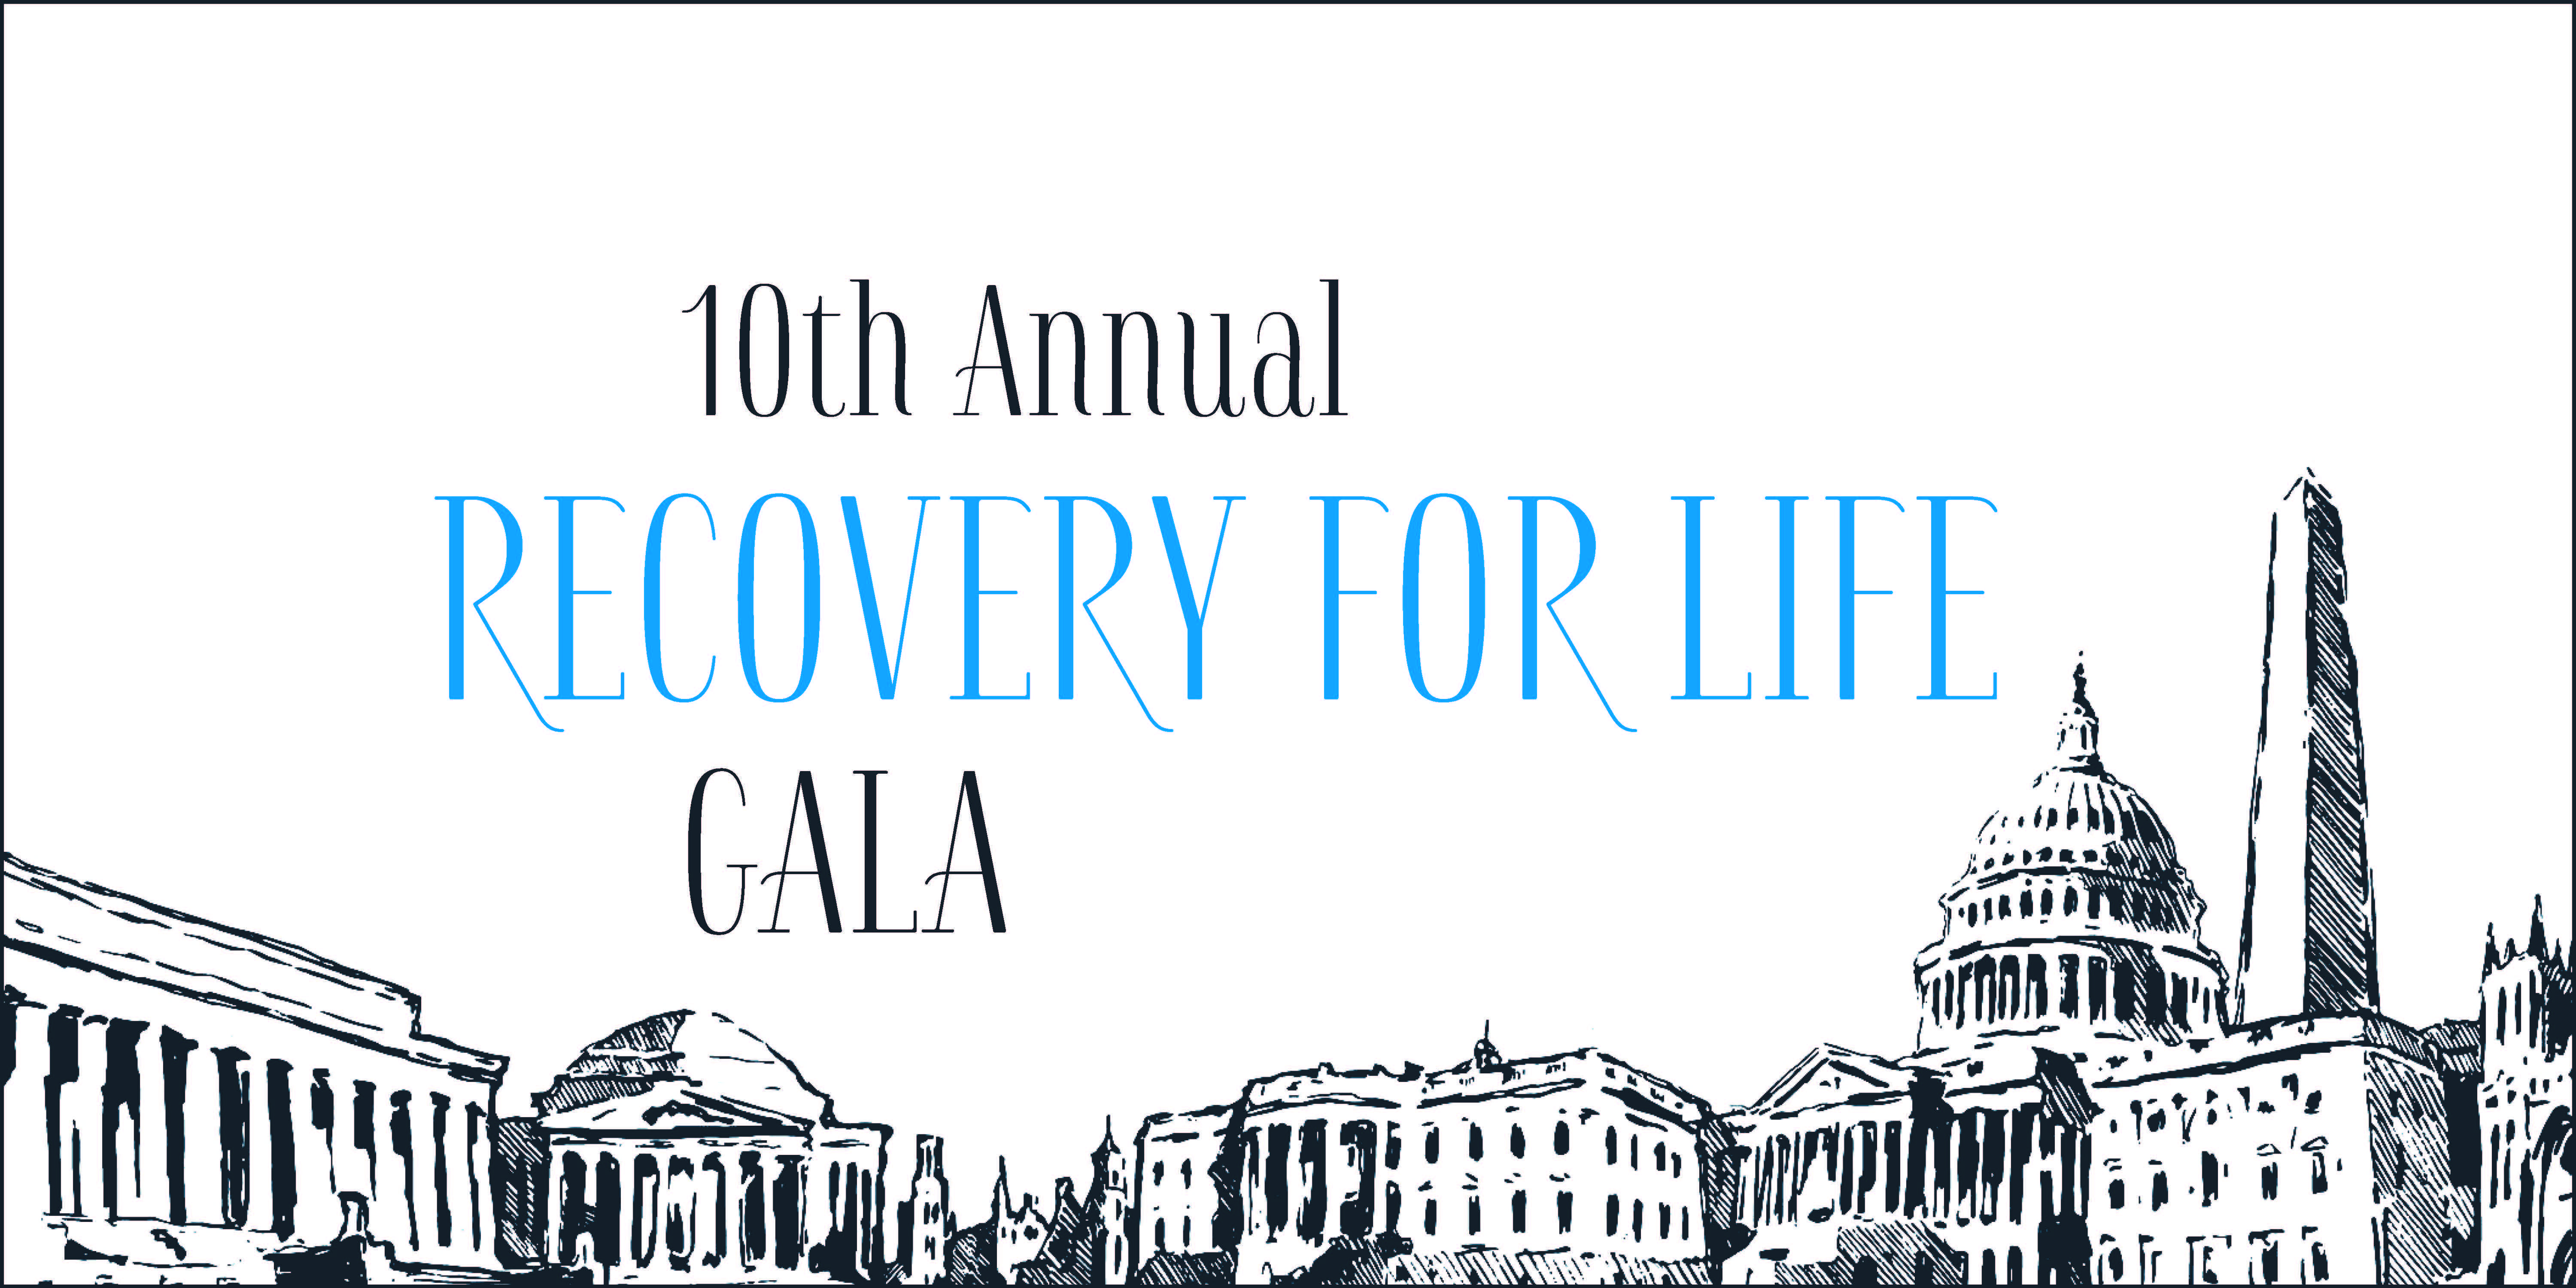 10th Annual Recovery for Life Washington D.C. Gala